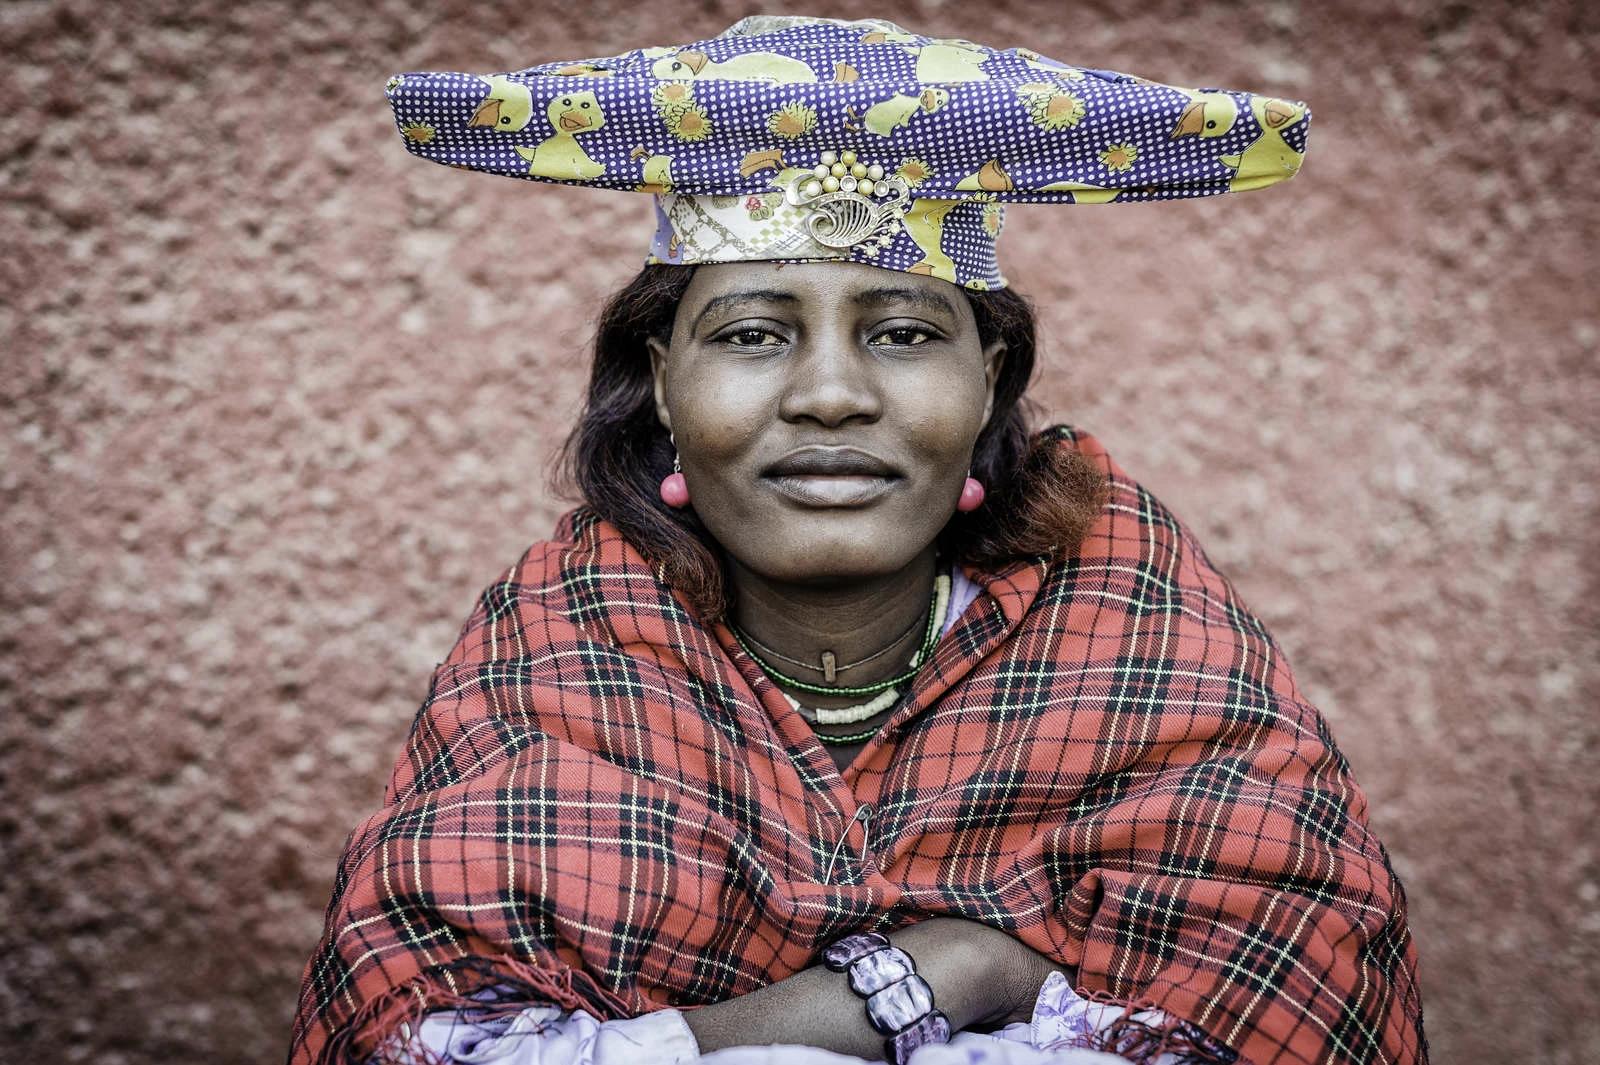 Herero woman with typical dress. Photo and story credits by Jorge Fernandez Garces